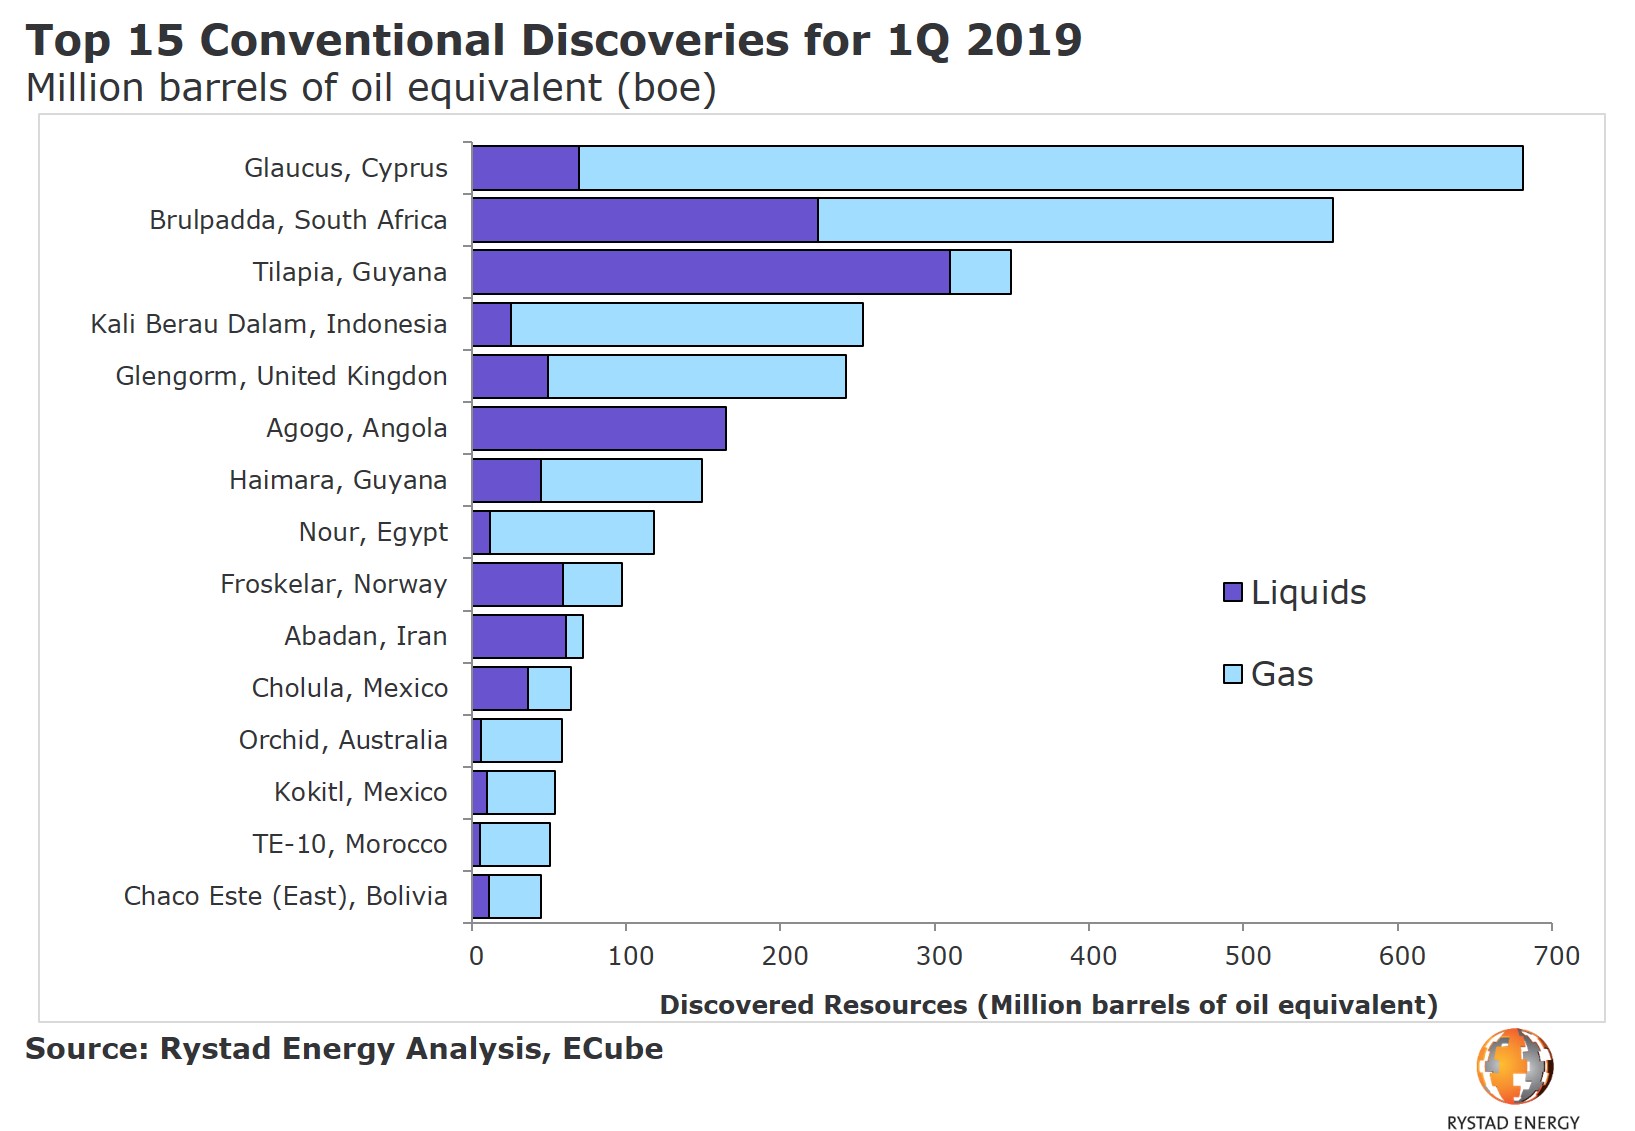 050419 Top 15 conventional discoveries 1Q19.jpg